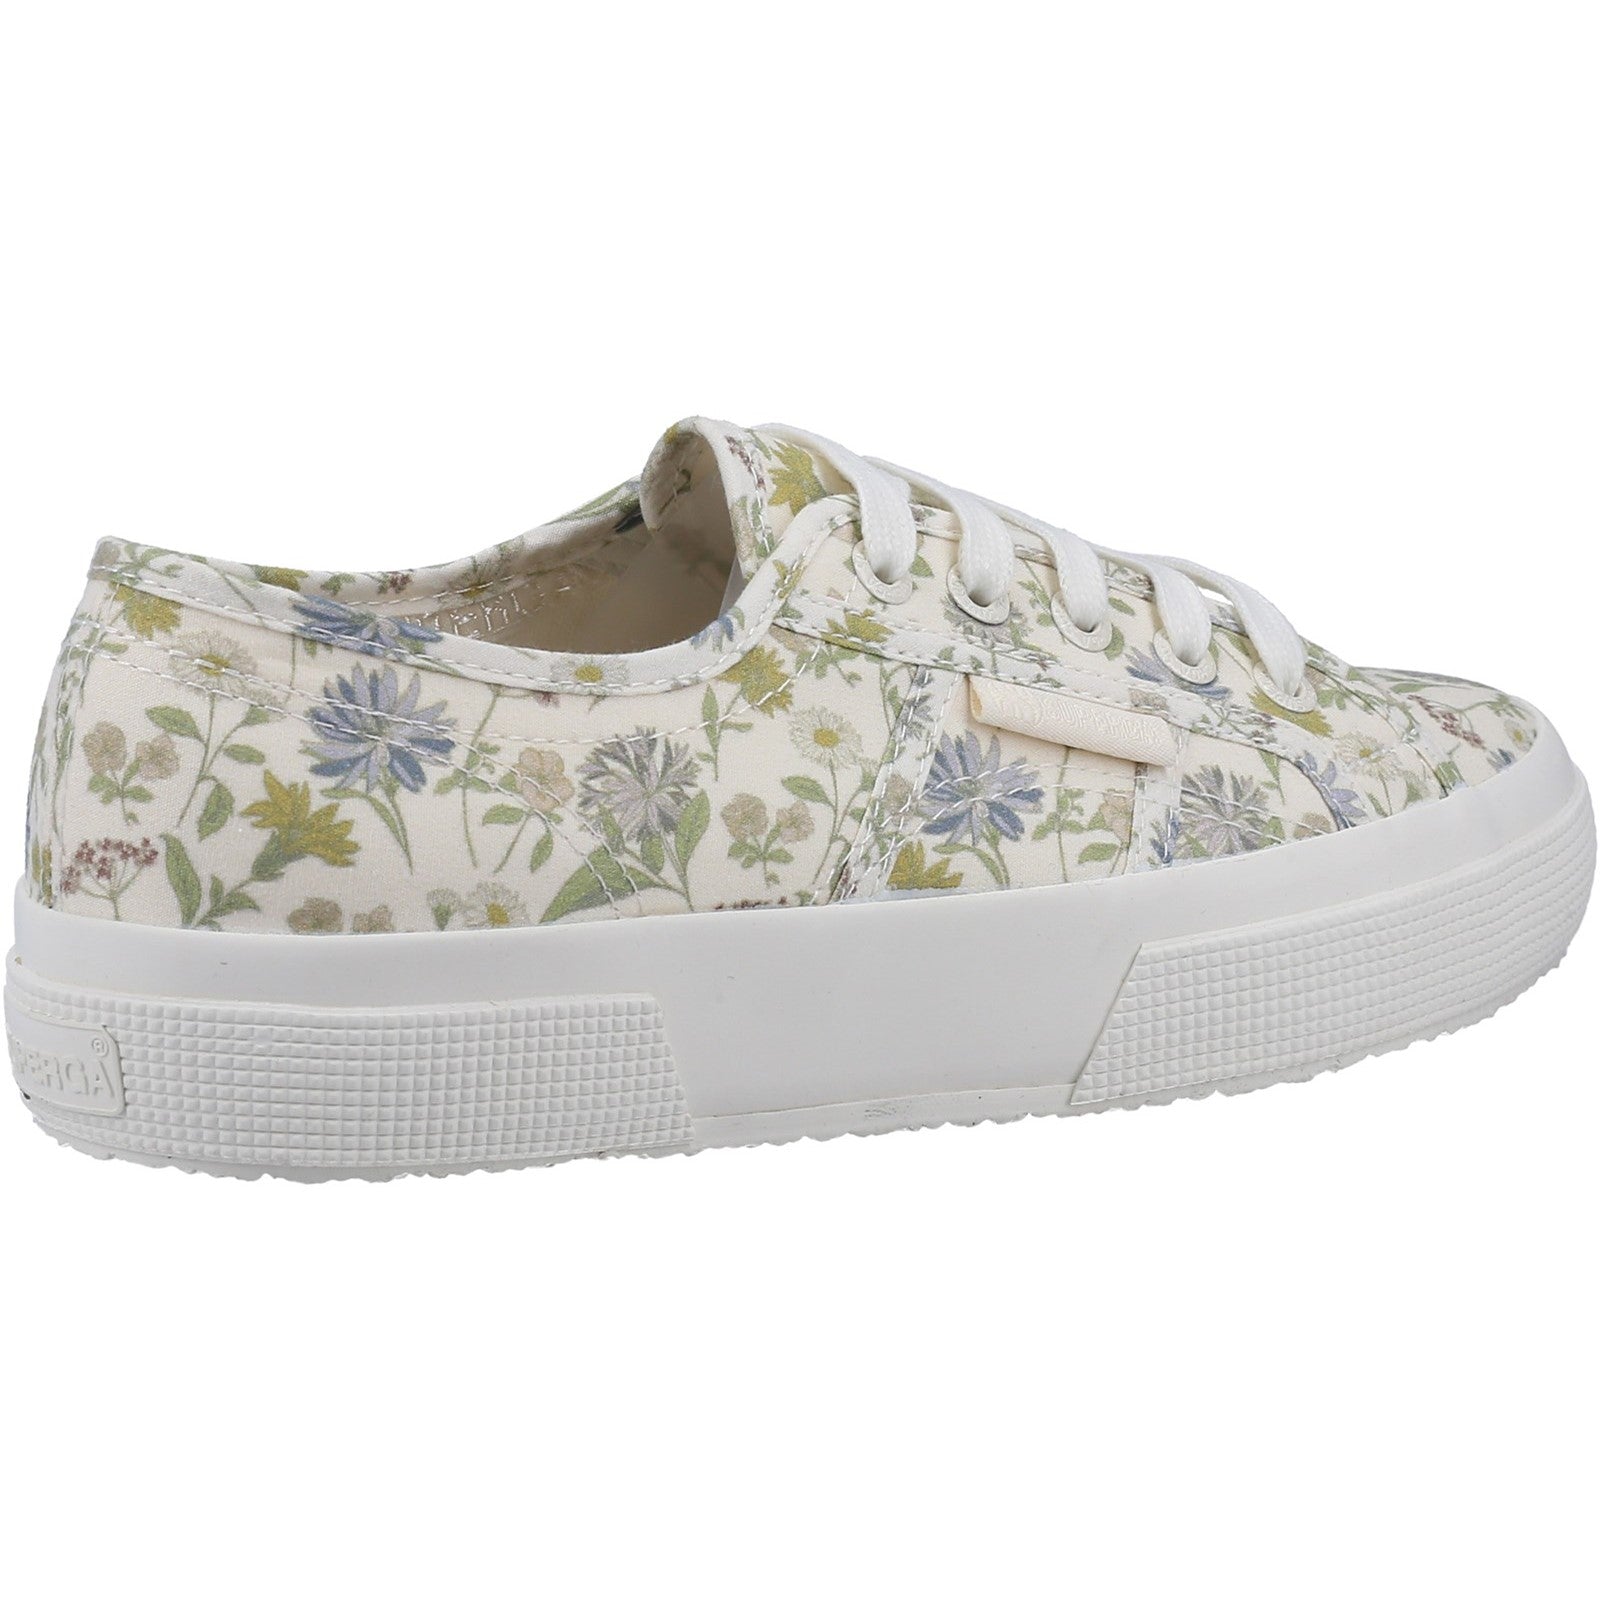 Superga Womens 2750 Floral Print Trainers - Light Olive